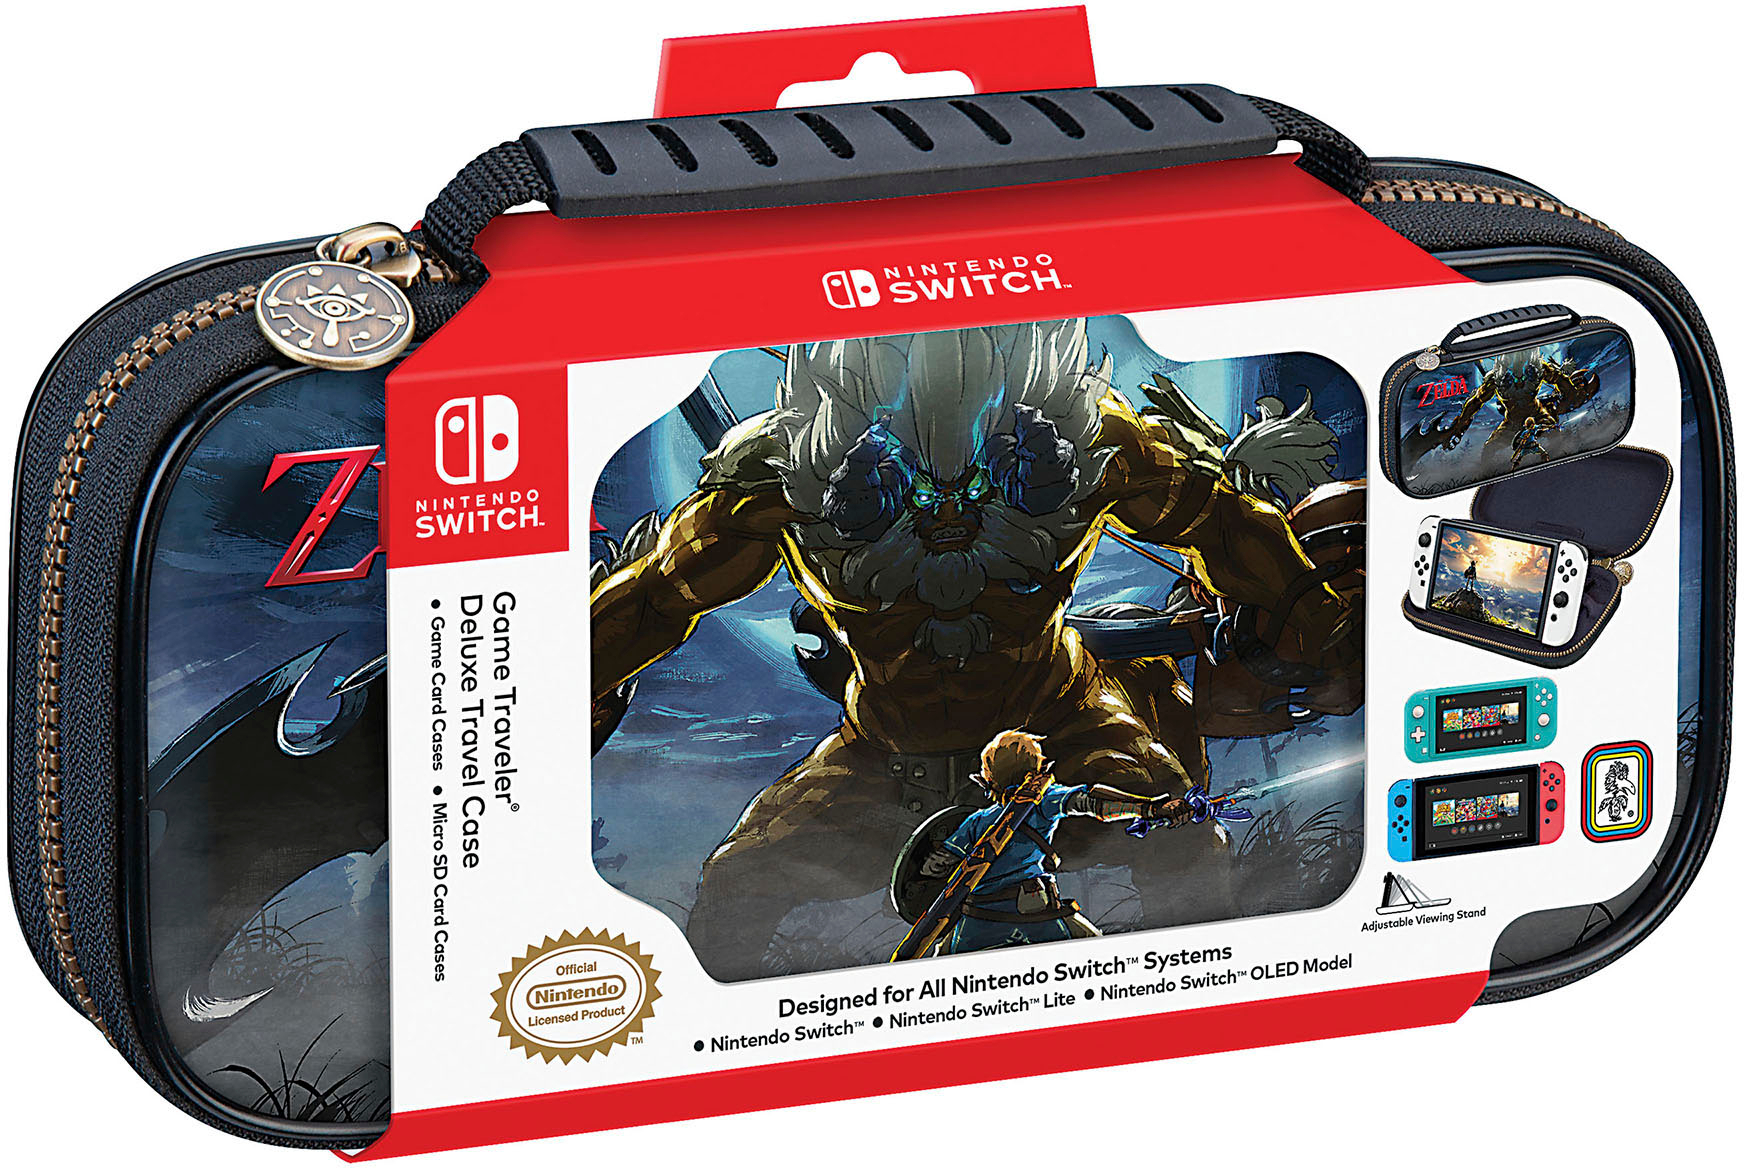 RDS Industries - Nintendo Switch Game Traveler Deluxe The Legend of Zelda Travel Case designed for all Nintendo Switch systems - Multi